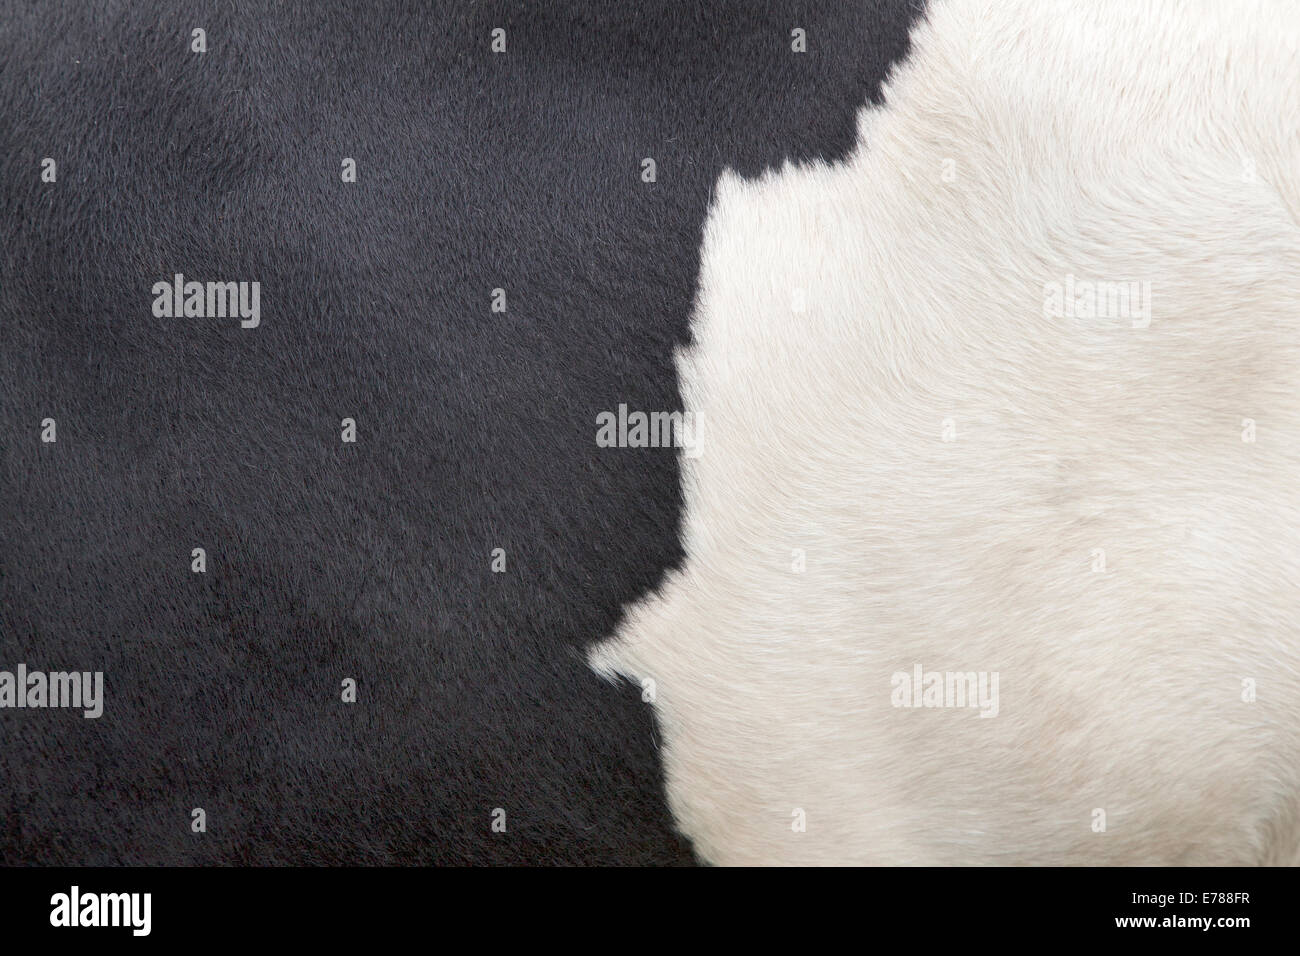 part of the pattern on hide of black and white cow Stock Photo